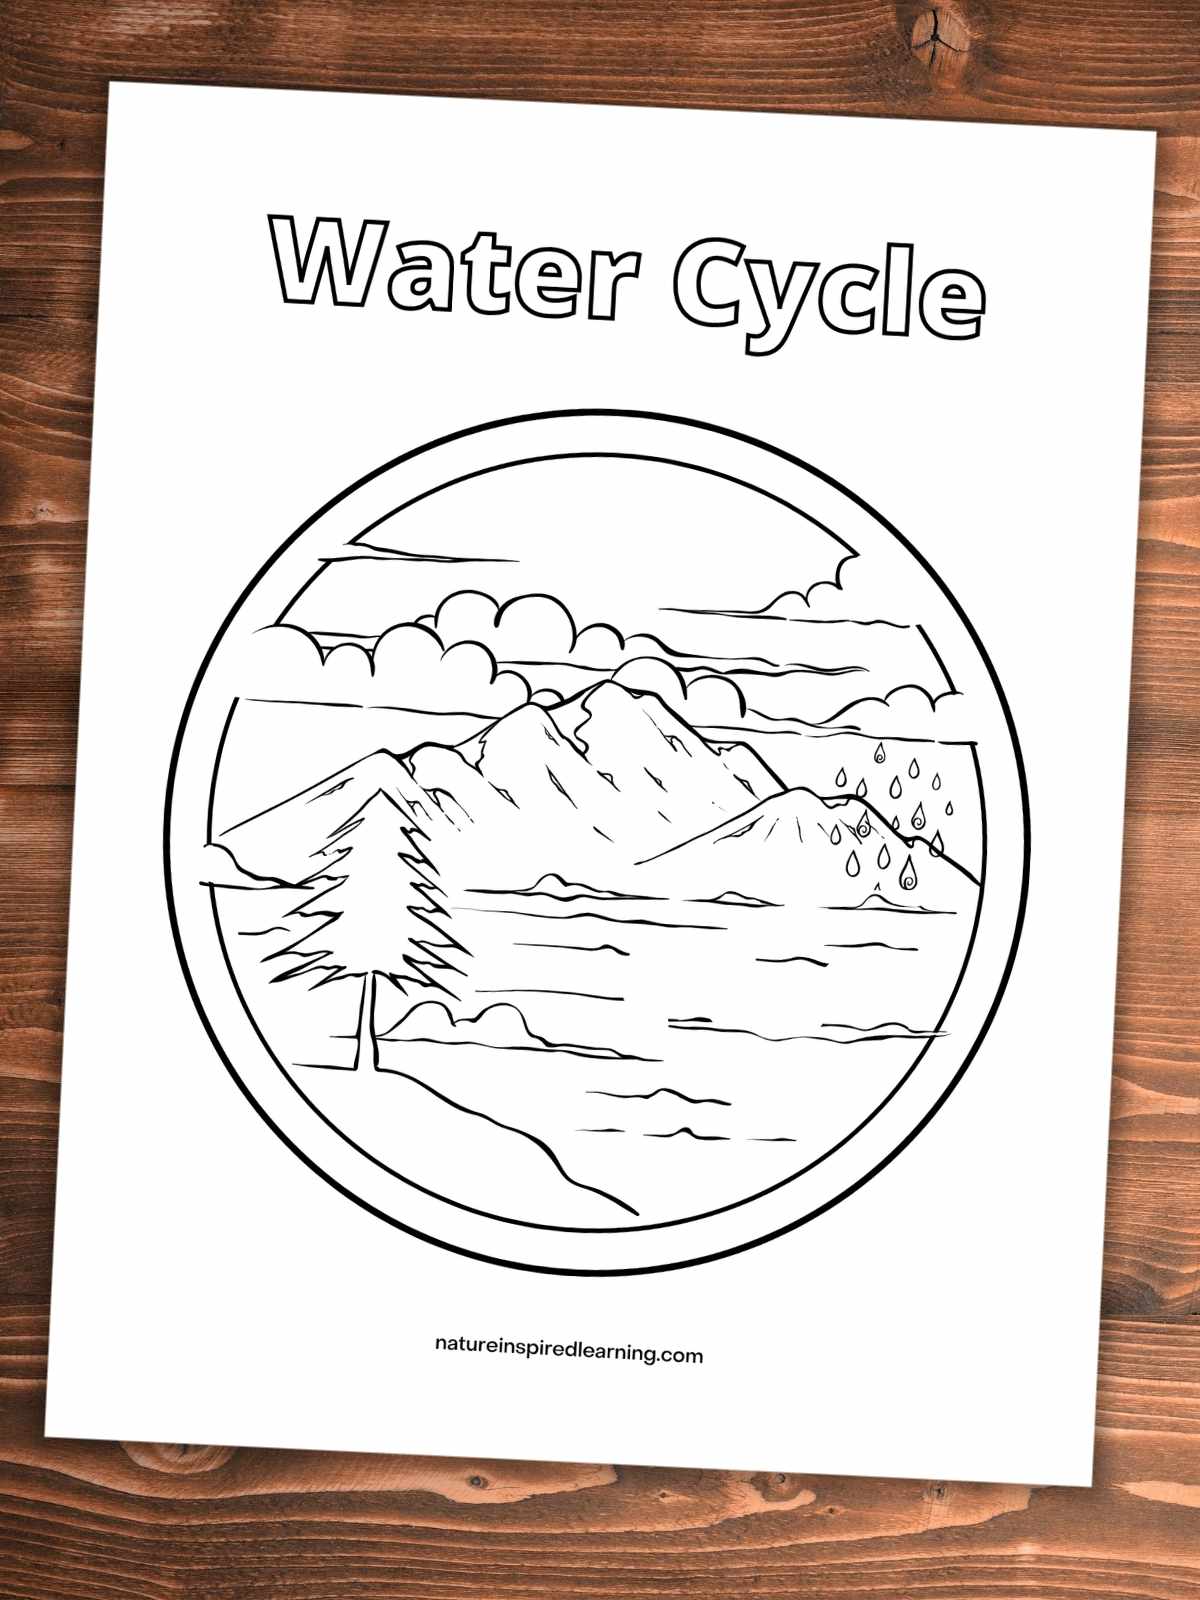 Water Cycle in bubble letters above a circle with mountains, water, trees, and clouds. Black and white printable on a wooden background